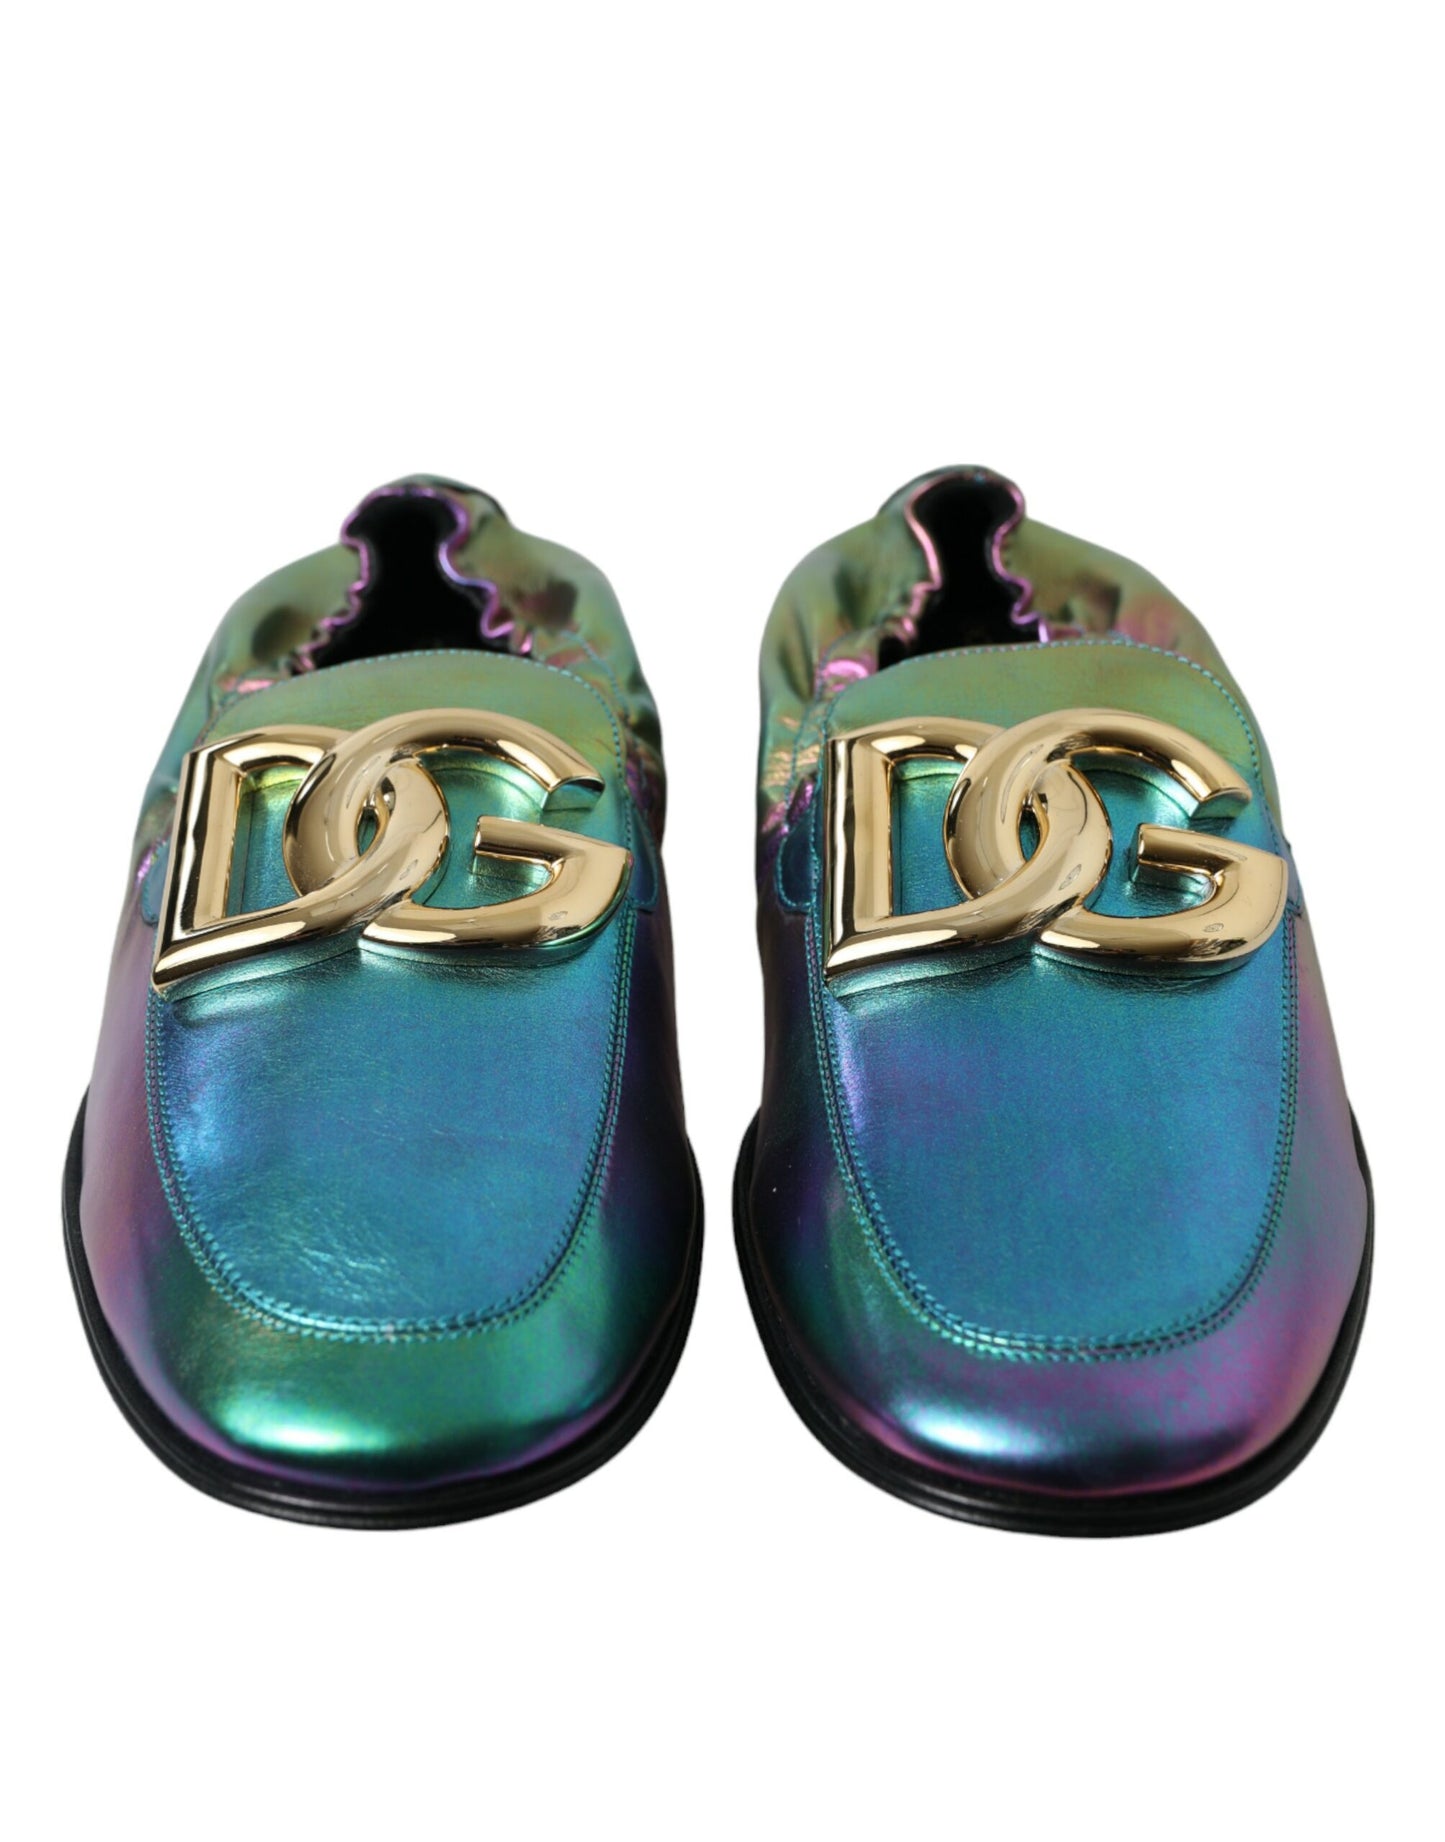 Elegant Iridescent Loafers for Gents